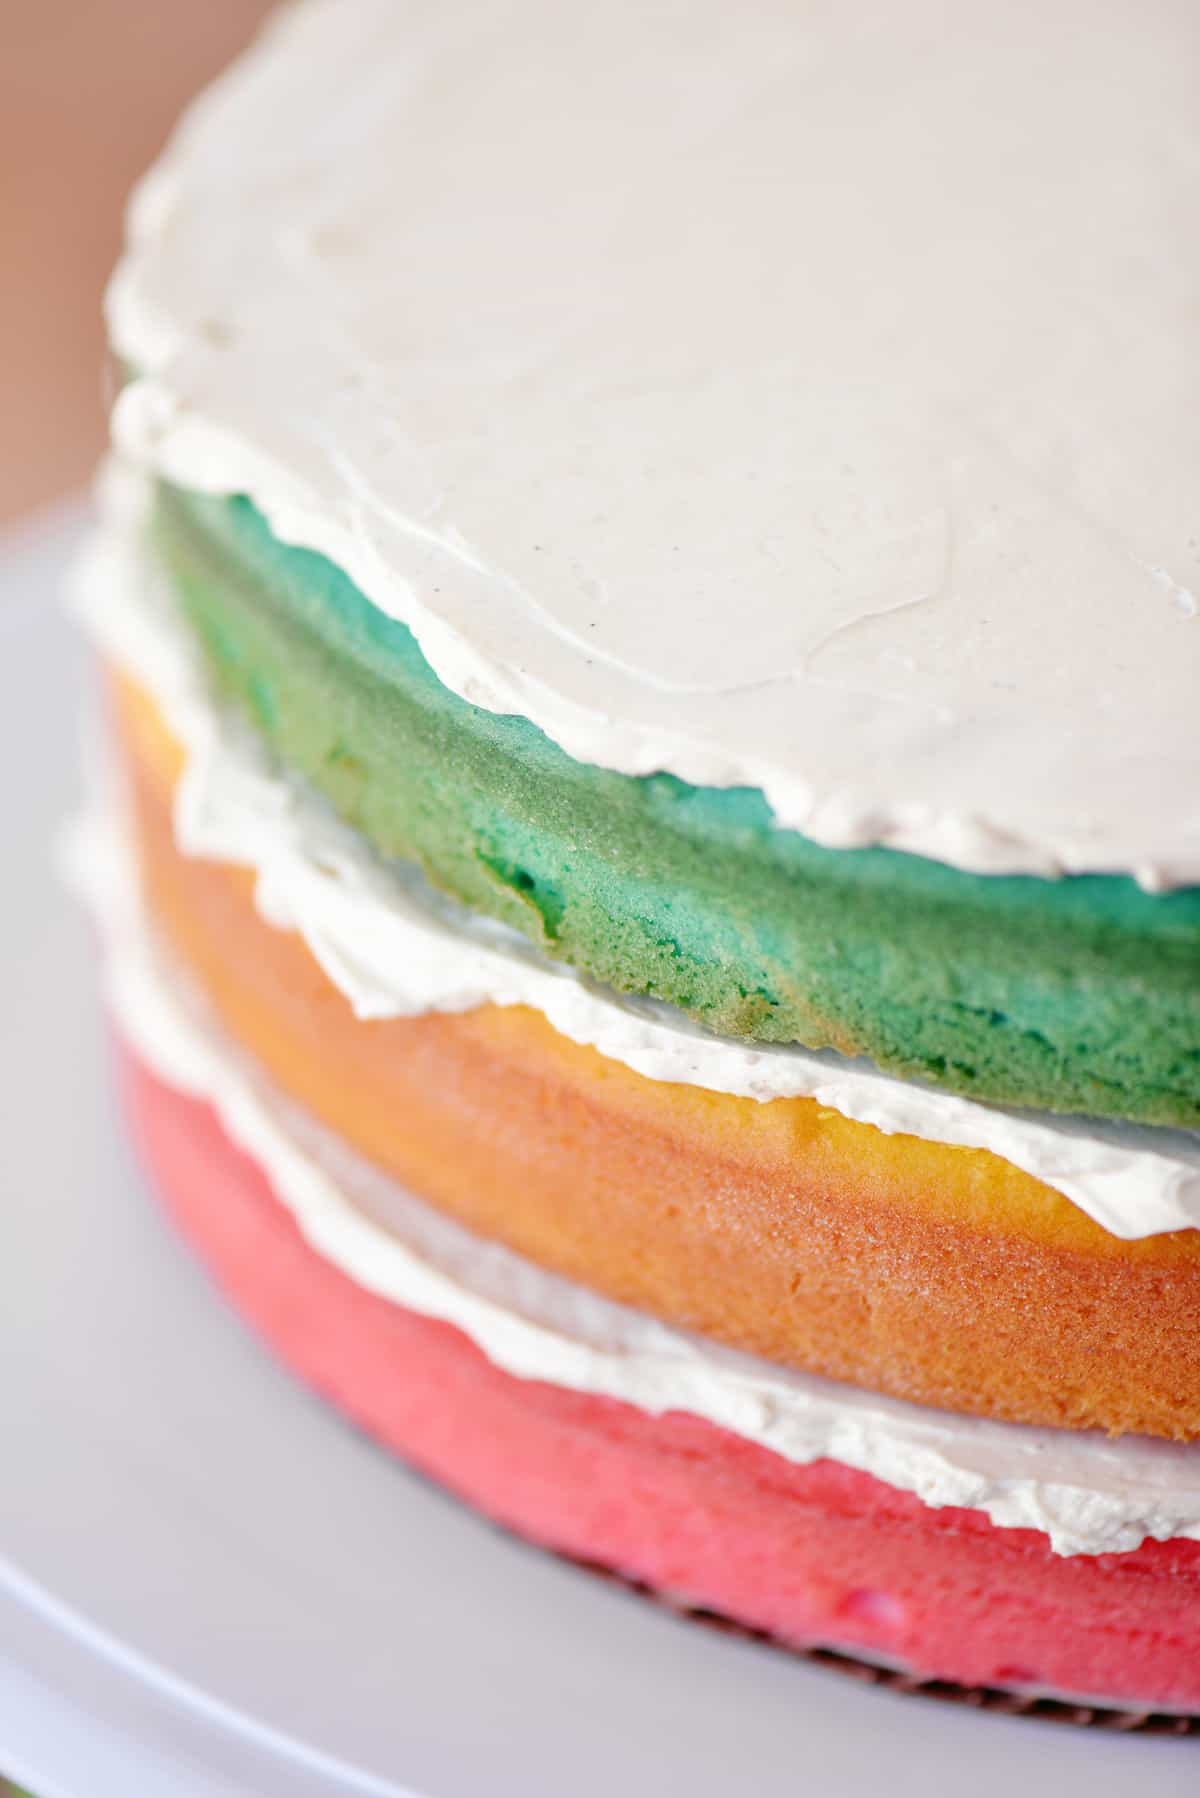 Add vanilla bean frosting to each of the three pastel layers.